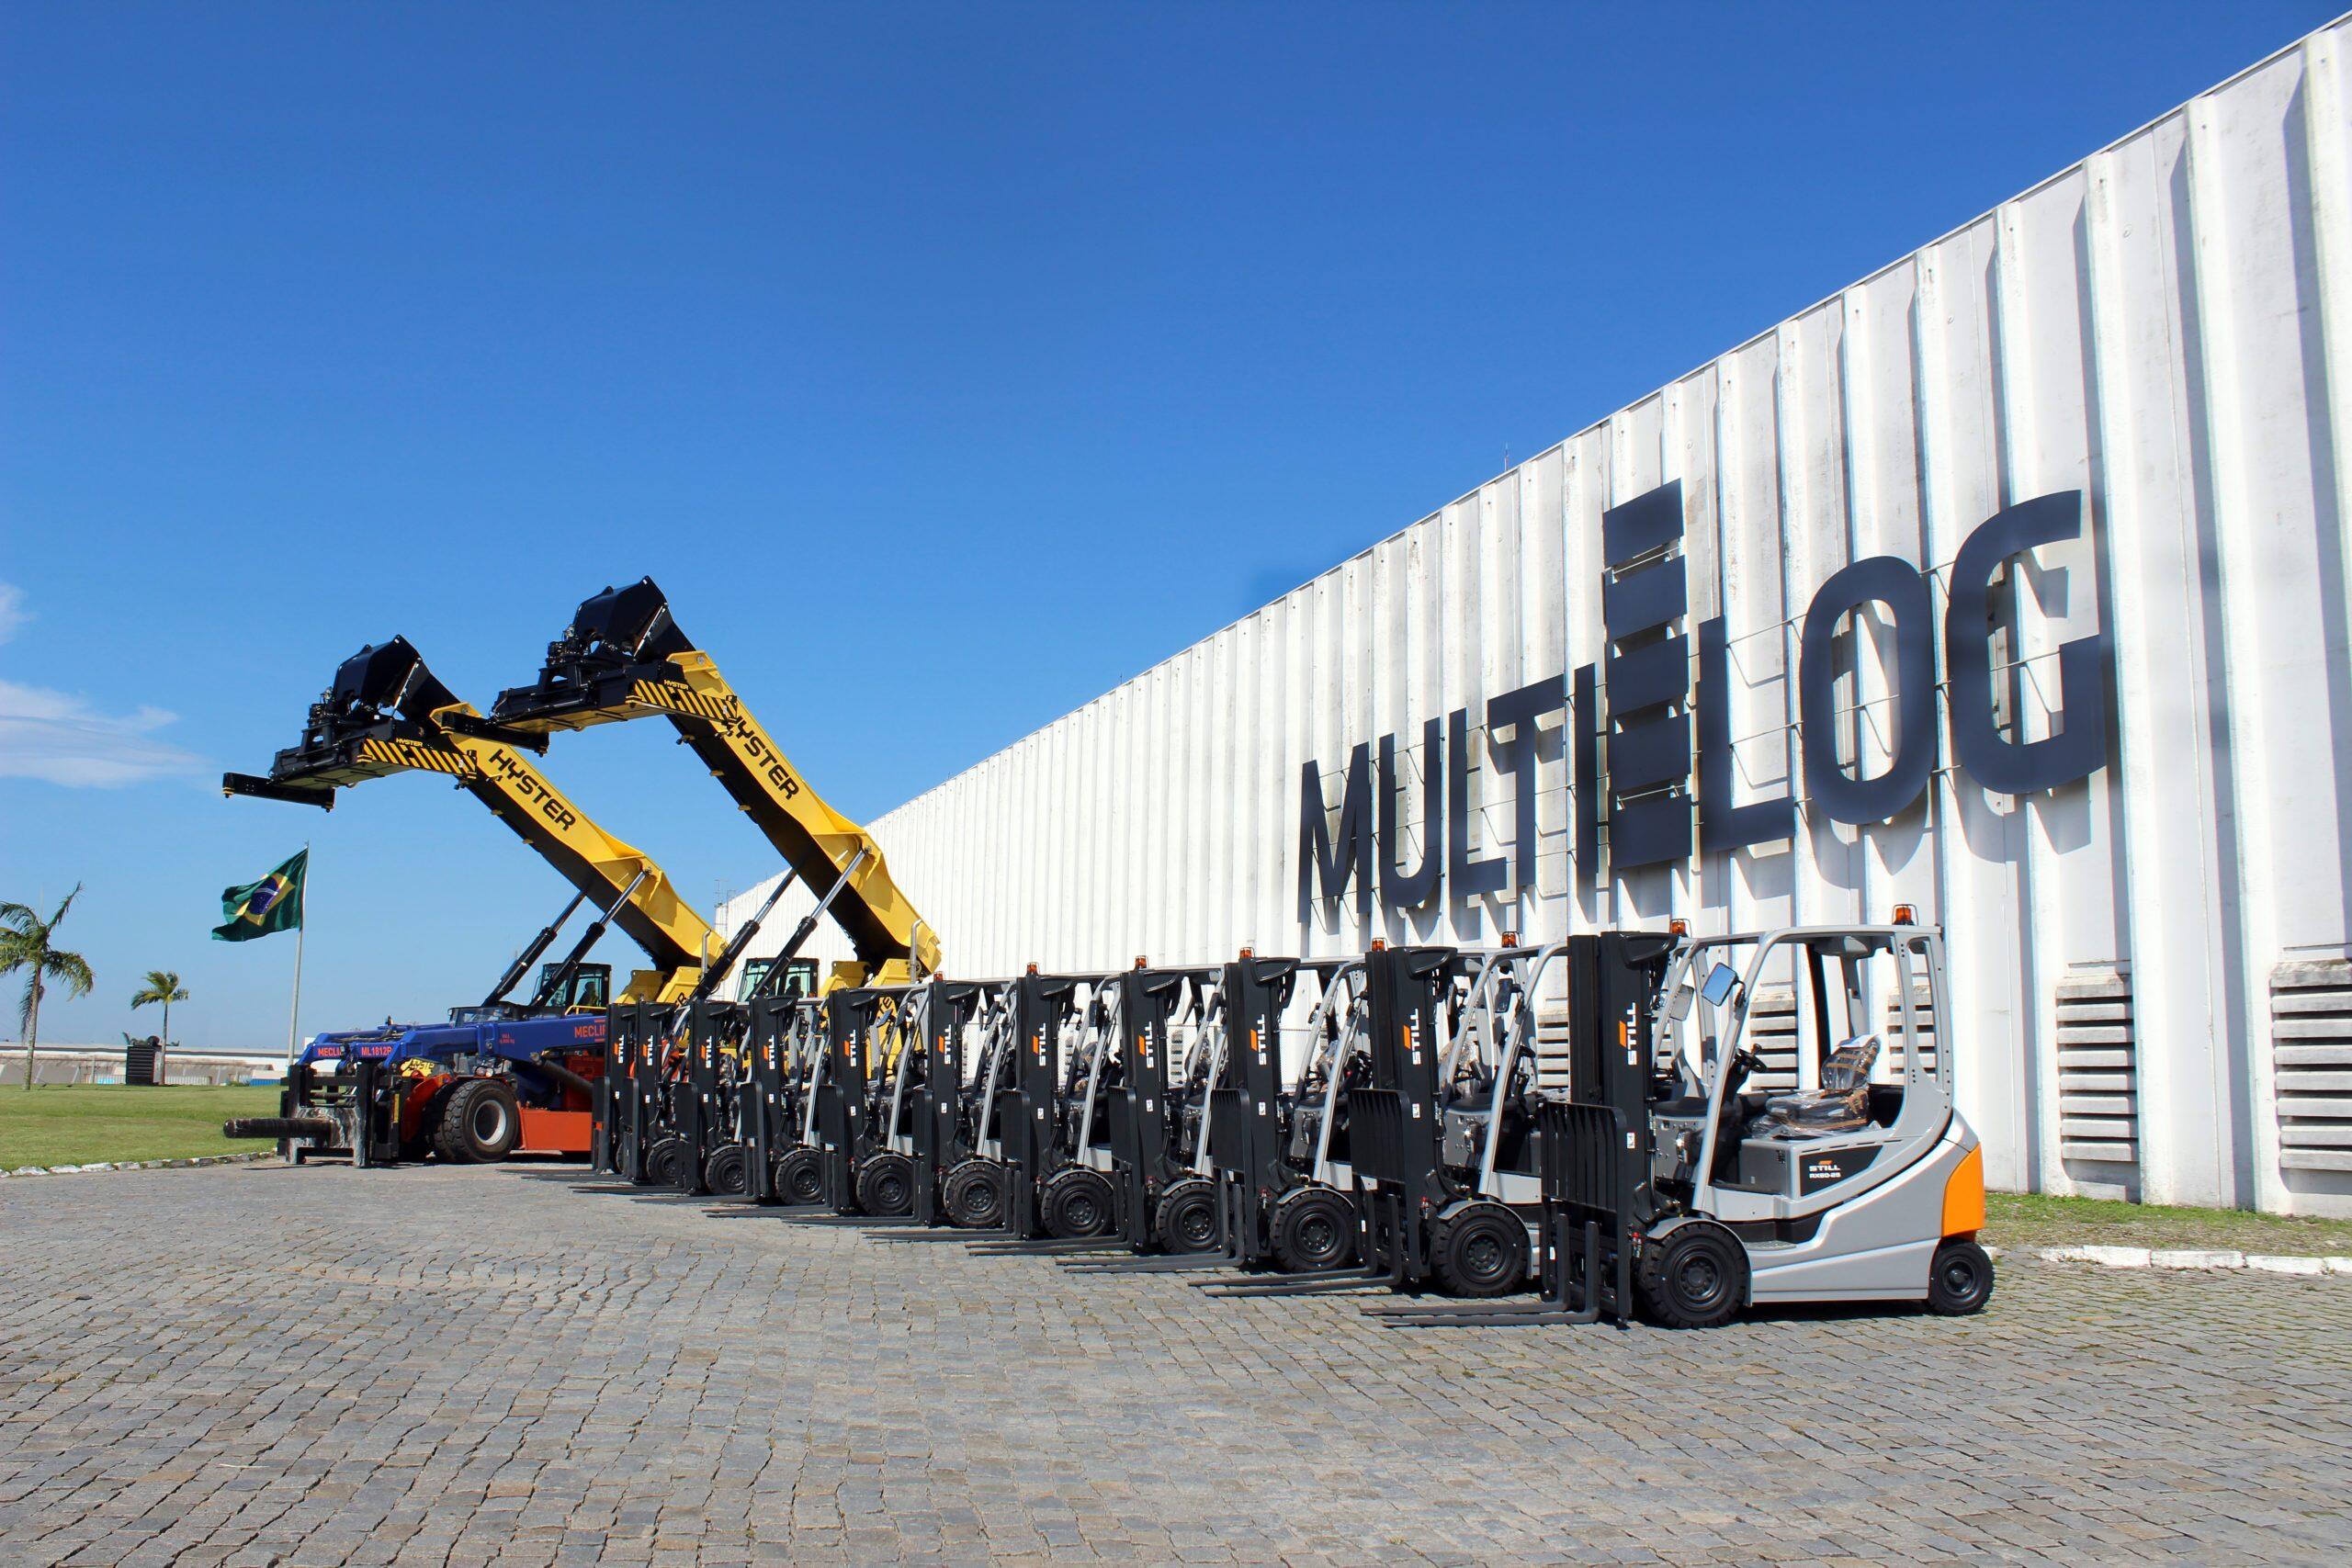 Multilog invests in equipment to increase the efficiency of operations